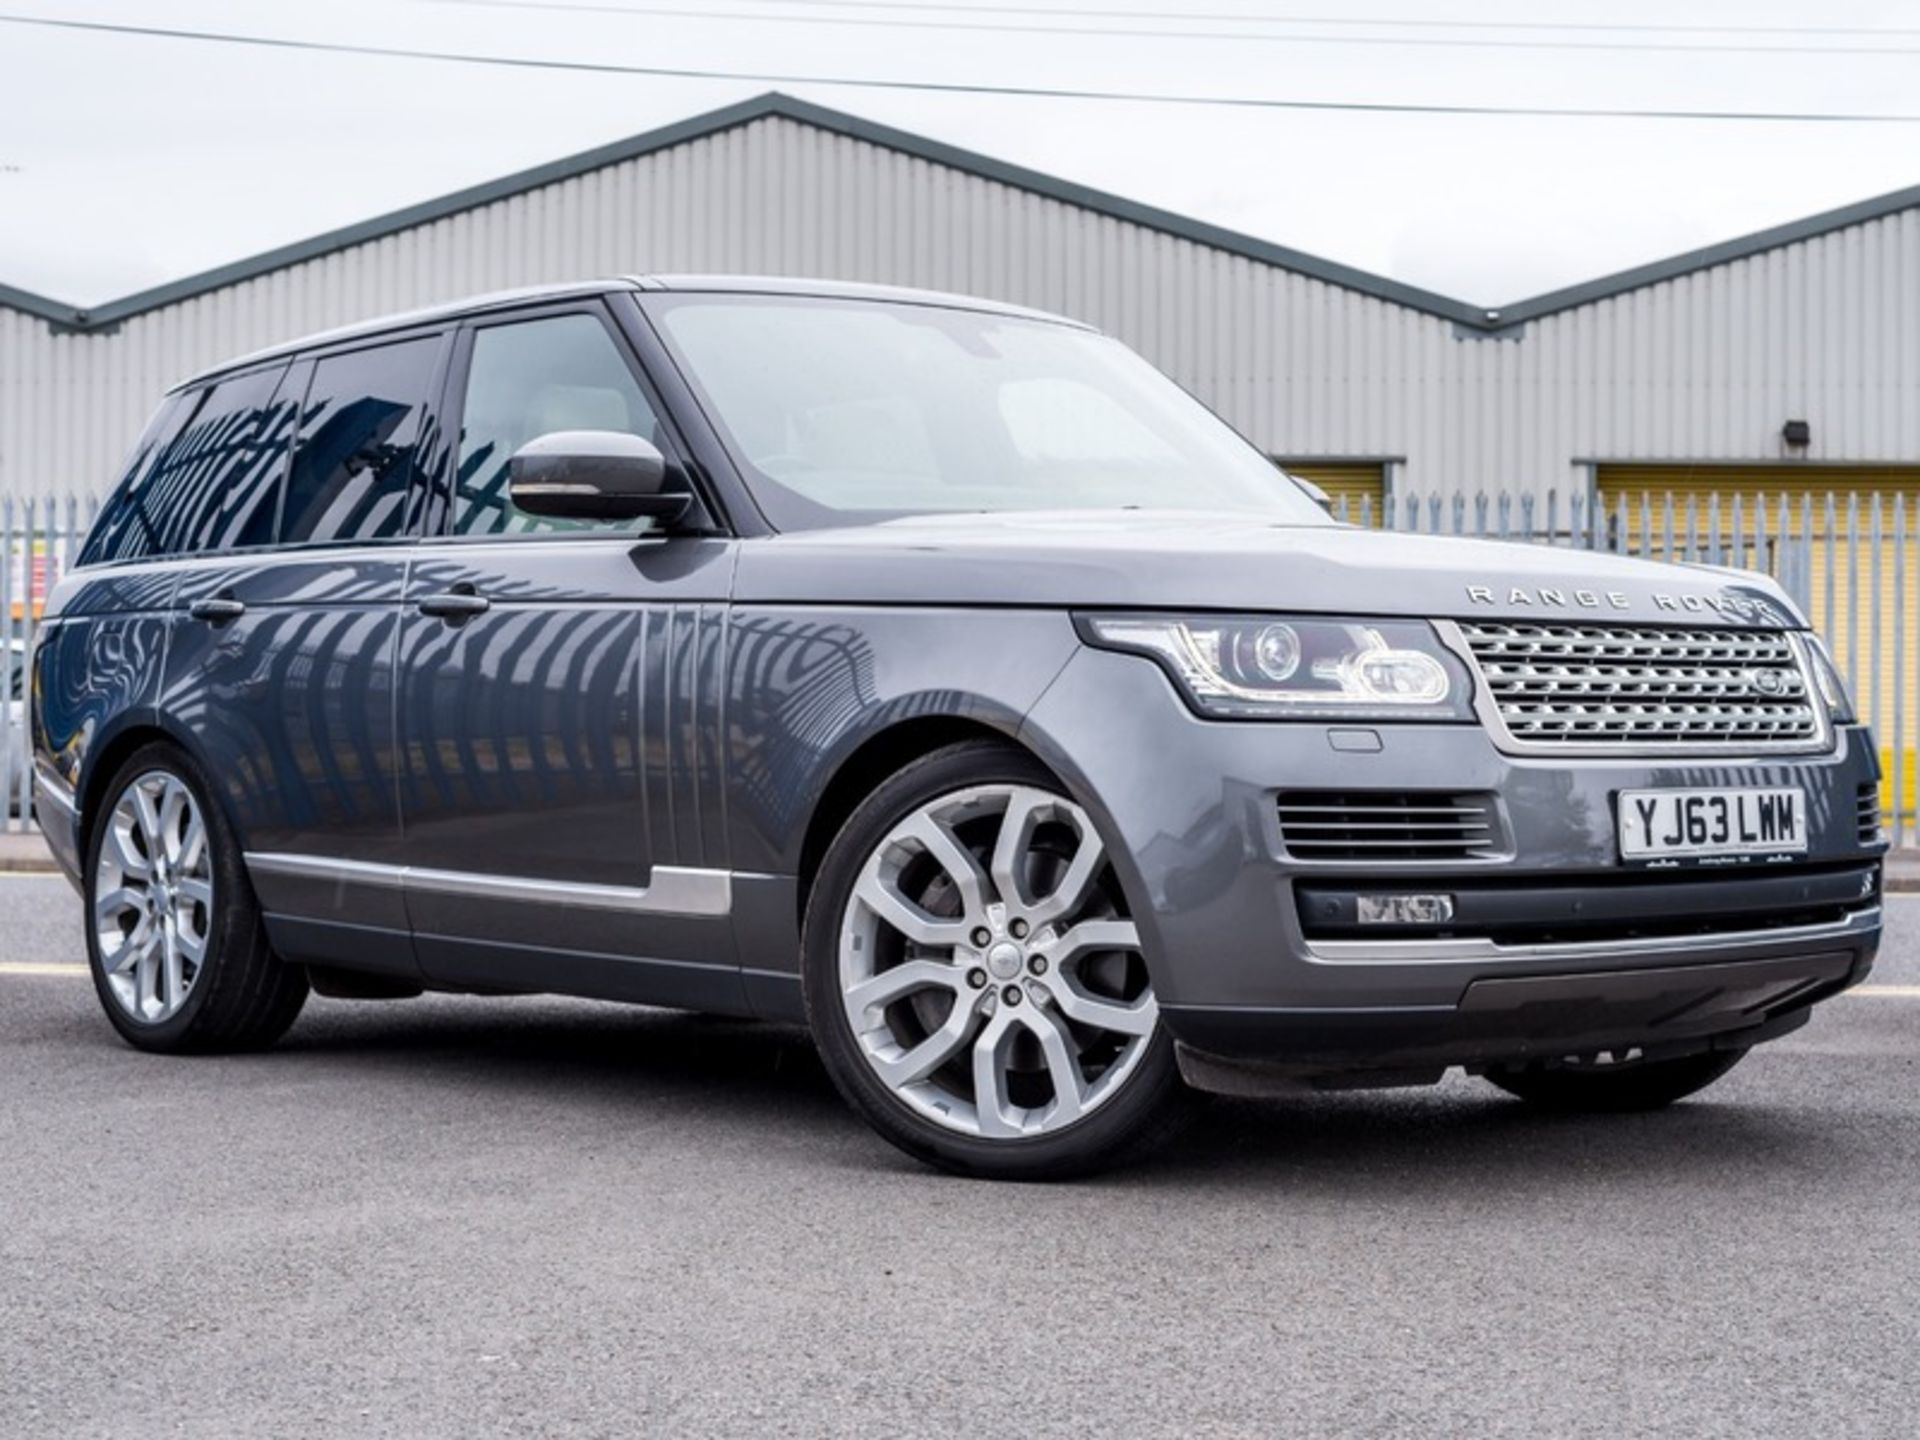 2013/63 REG LAND ROVER RANGE ROVER VOGUE SDV8 AUTOMATIC 4.4 DIESEL GREY 4X4, SHOWING 1 FORMER KEEPER